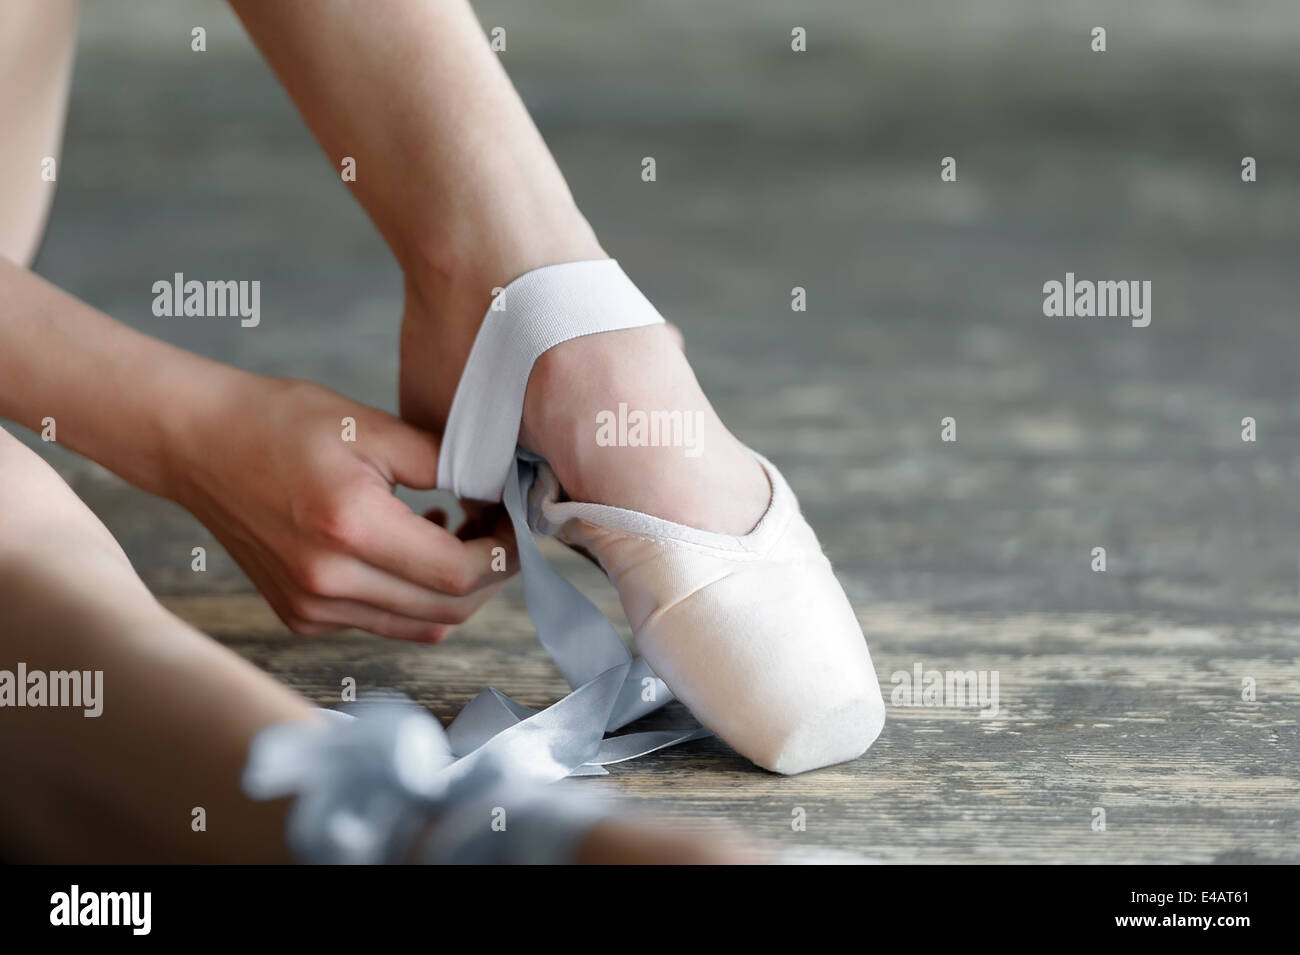 Taking off the ballet shoes after rehearsal or performance Stock Photo ...